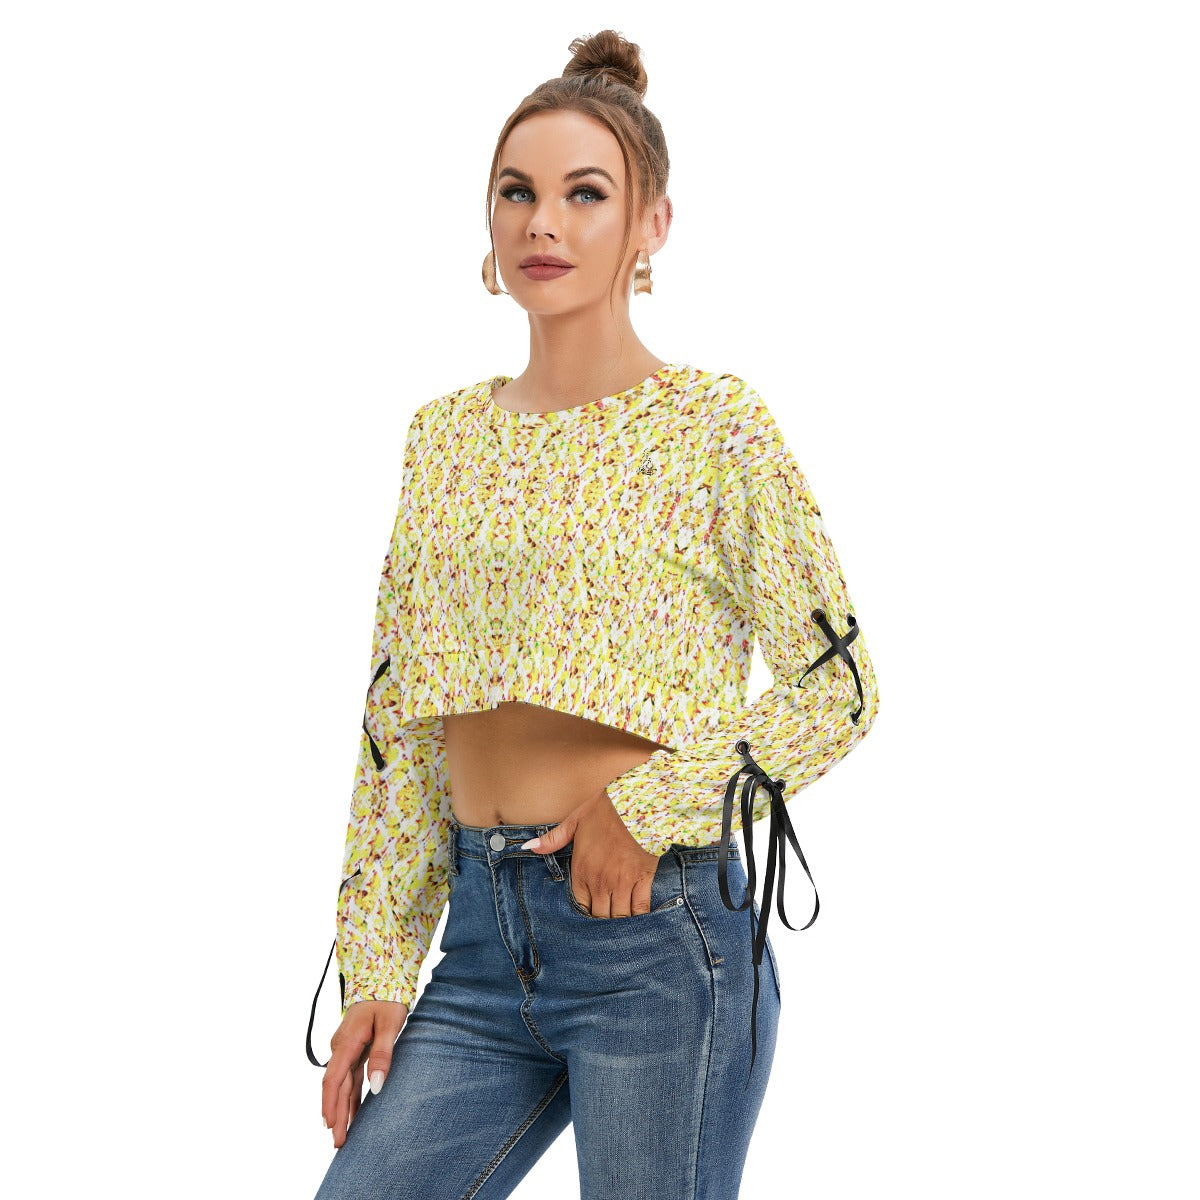 Officially Sexy Yellow Stitched FHC Women's Long Sleeve Cropped Sweatshirt With Lace up Sleeves Left